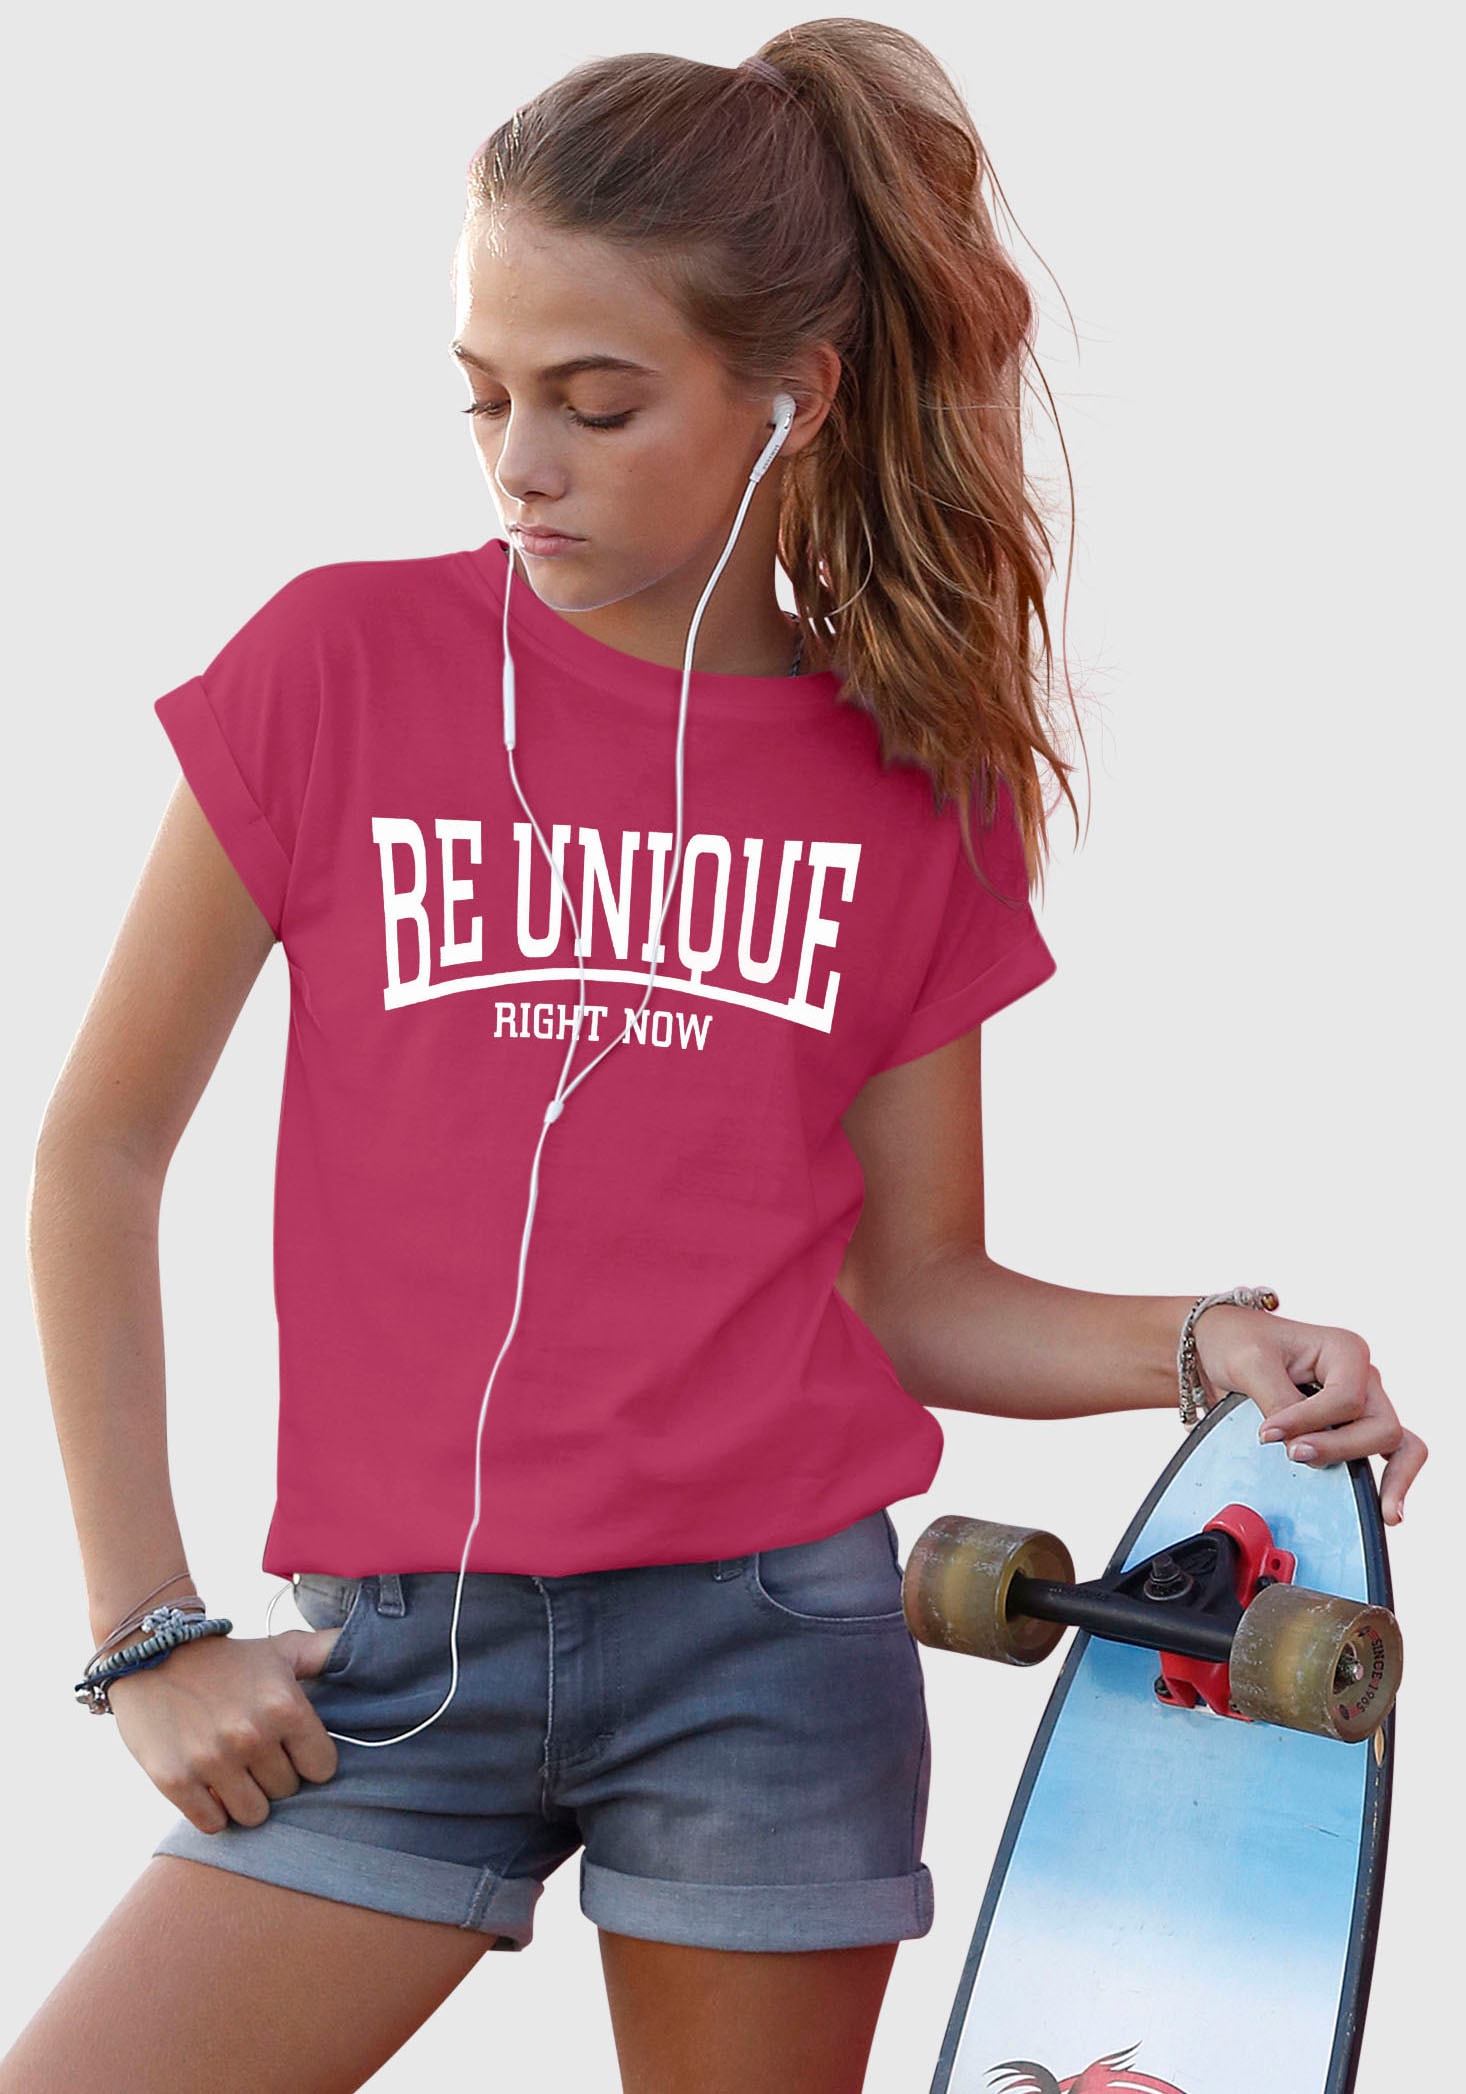 right unique »Be T-Shirt KIDSWORLD in legerer Form bei now«, - OTTO